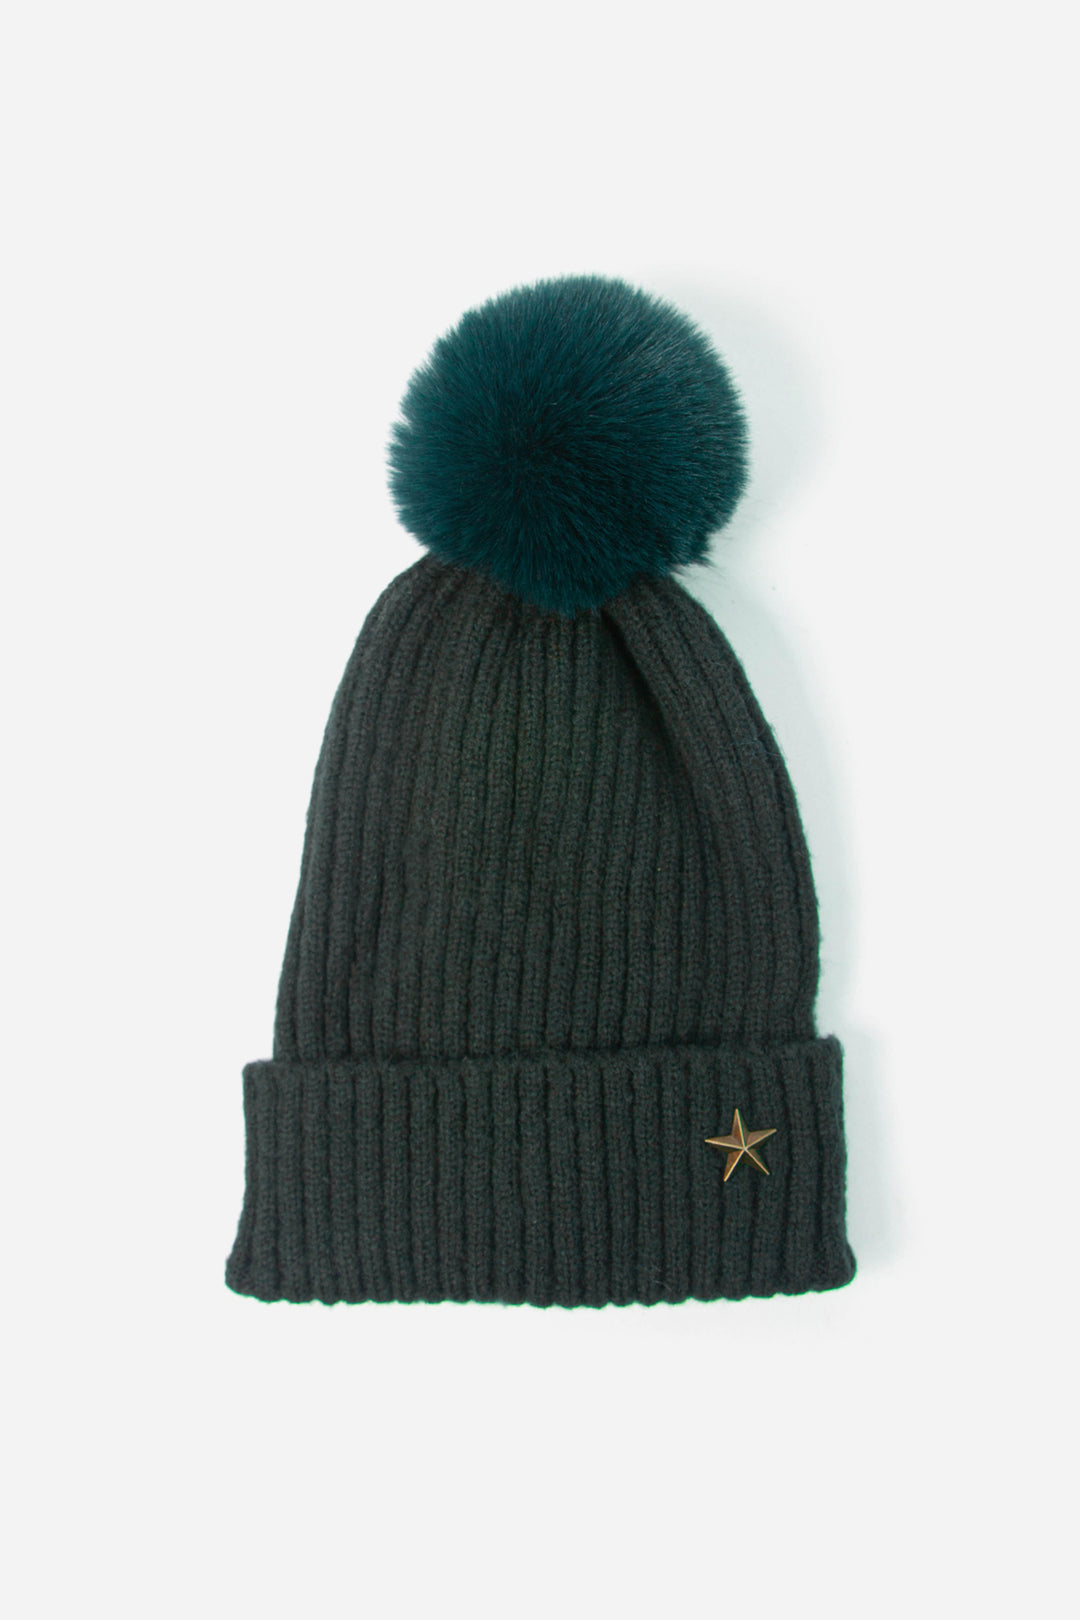 Forest Green Metal Star Pom Pom Hat with Antique Gold Star